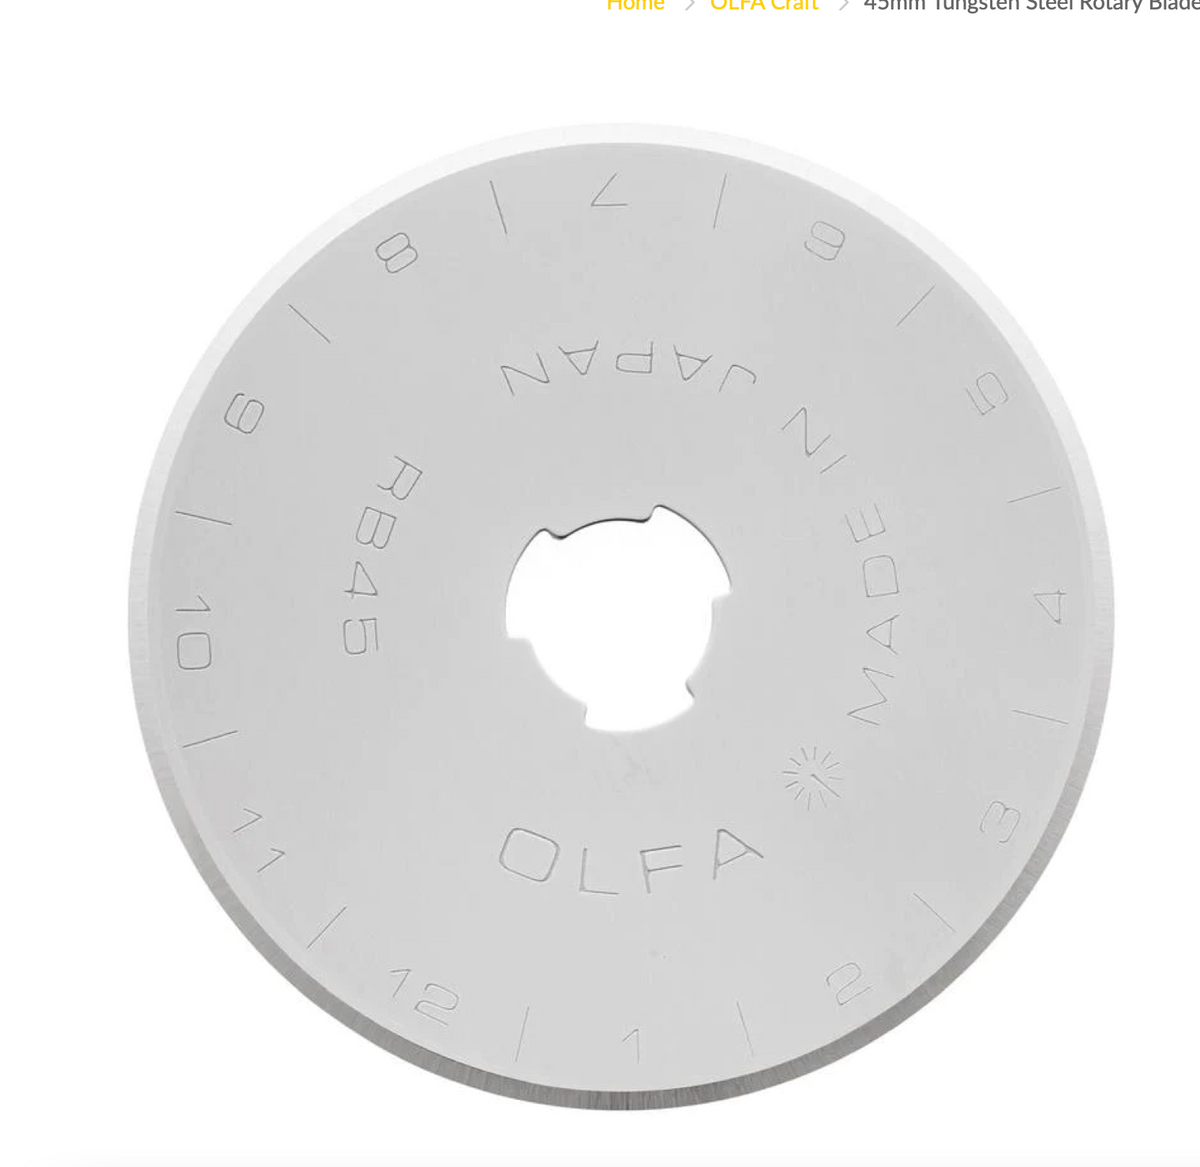 Rotary Blade Replacements 45mm - OLFA RB45-2 - Tungsten Tool Steel Rotary Blade 45mm - 2pc